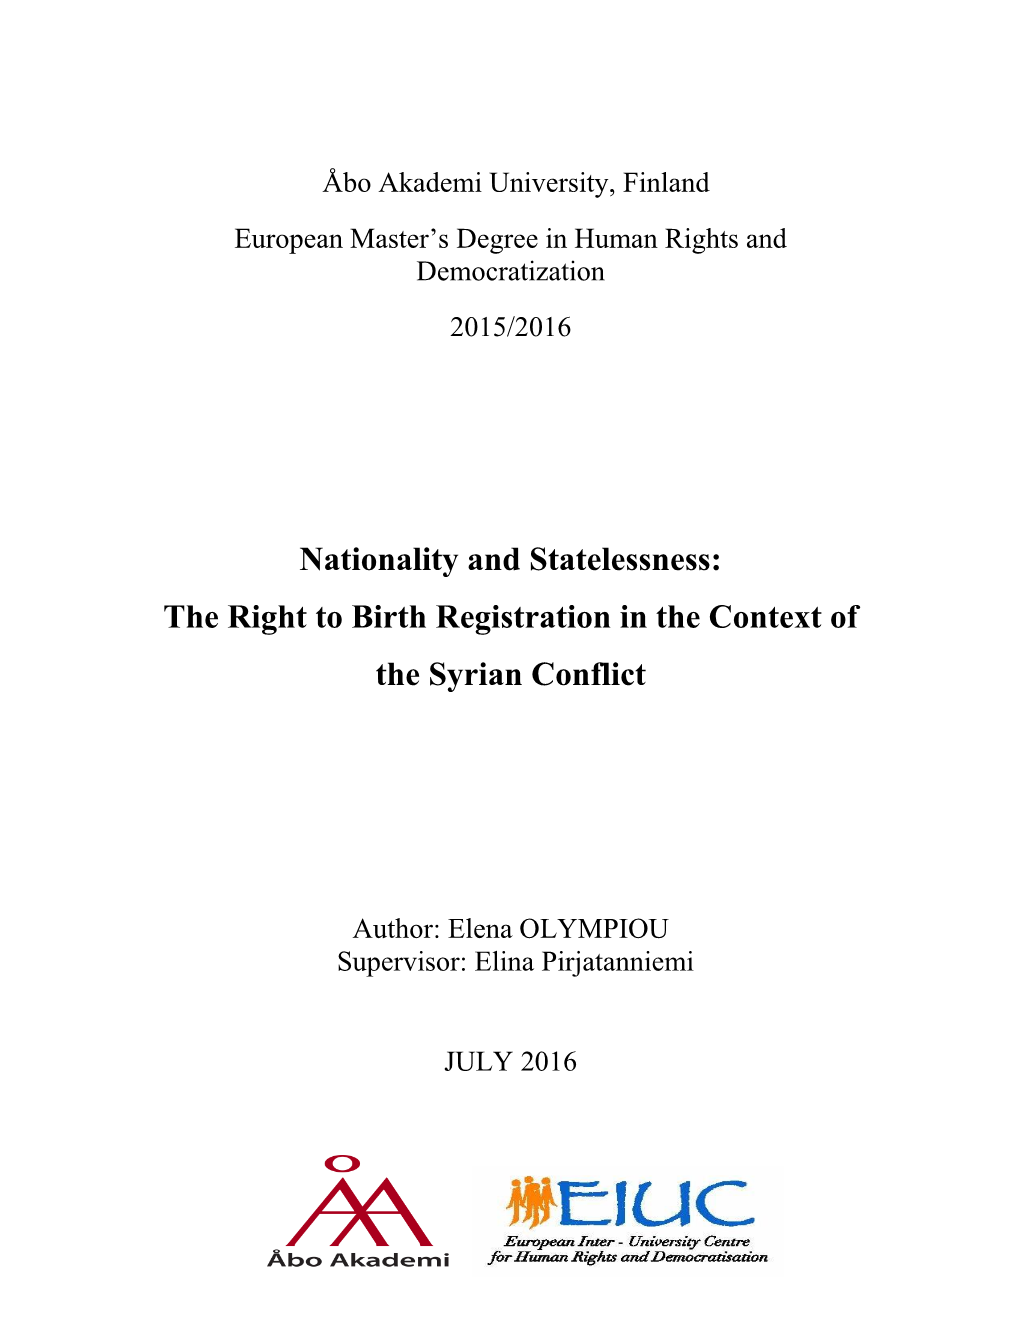 Nationality and Statelessness: the Right to Birth Registration in the Context of the Syrian Conflict